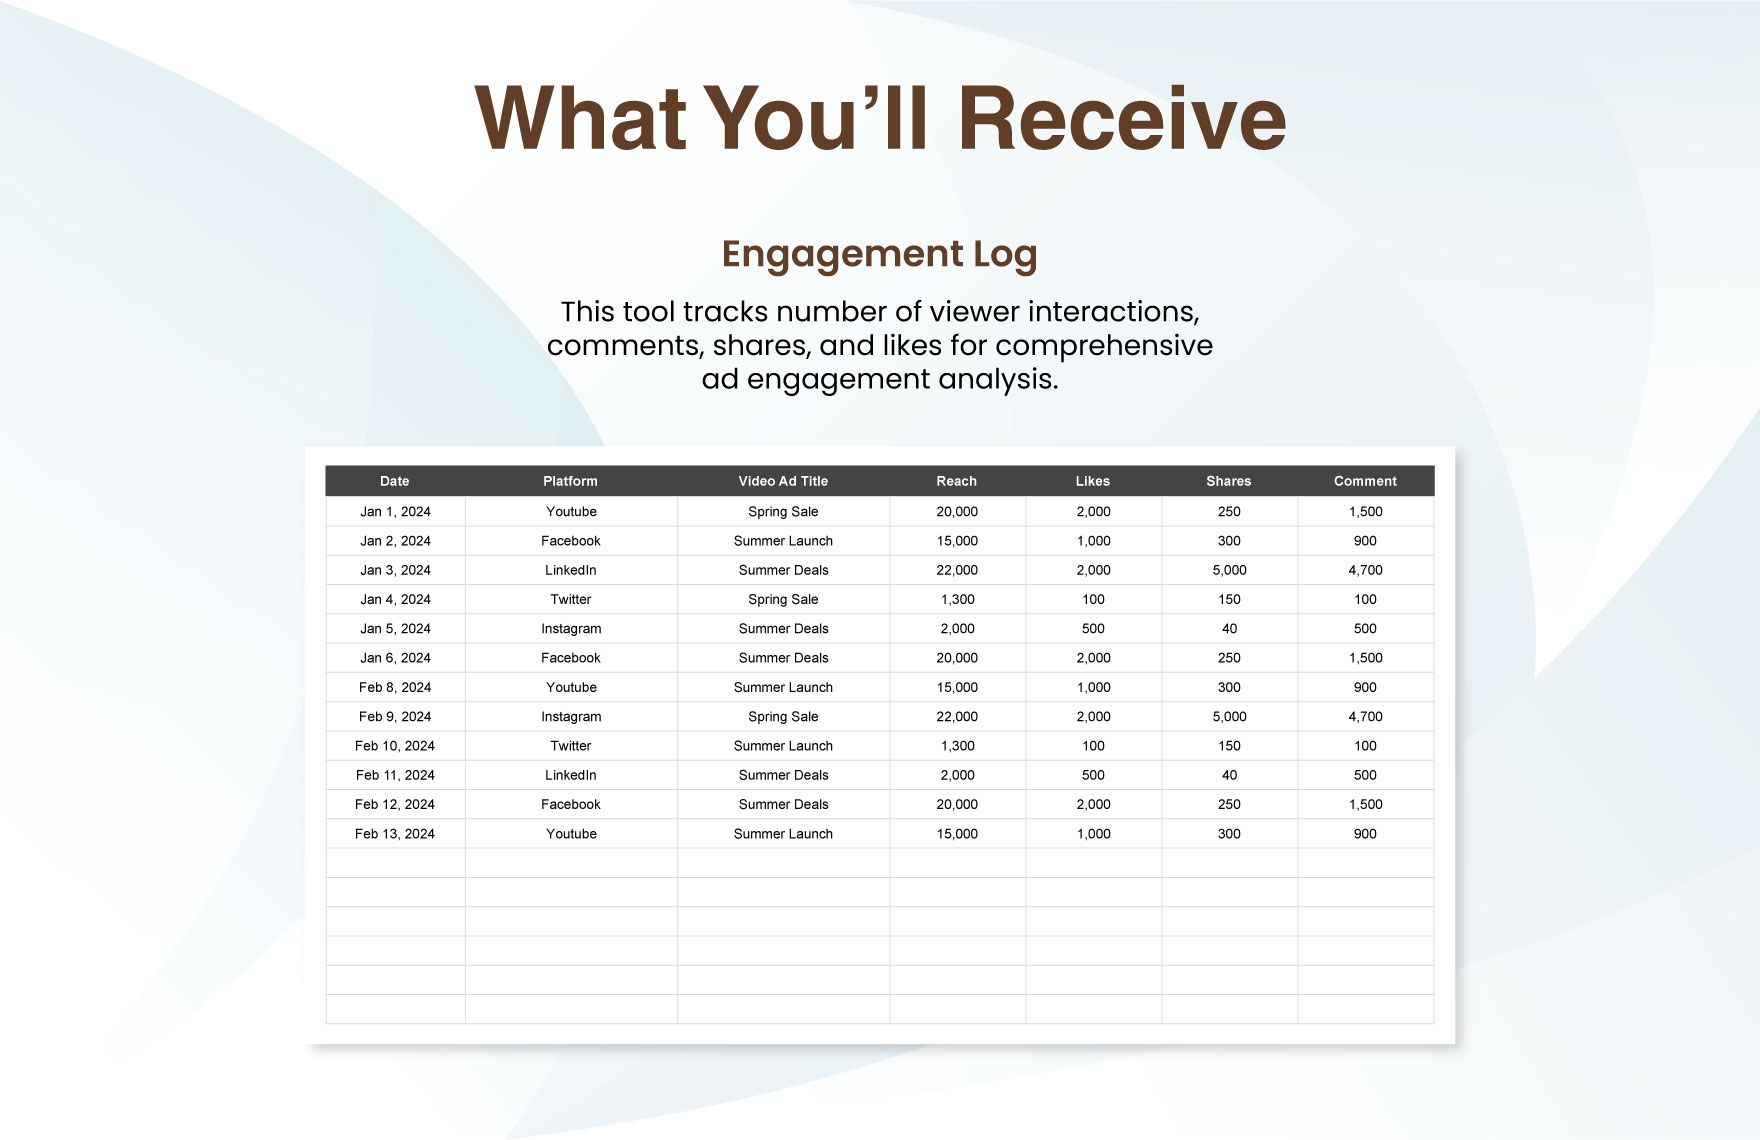 Advertising Video Ad Engagement Tracker Template